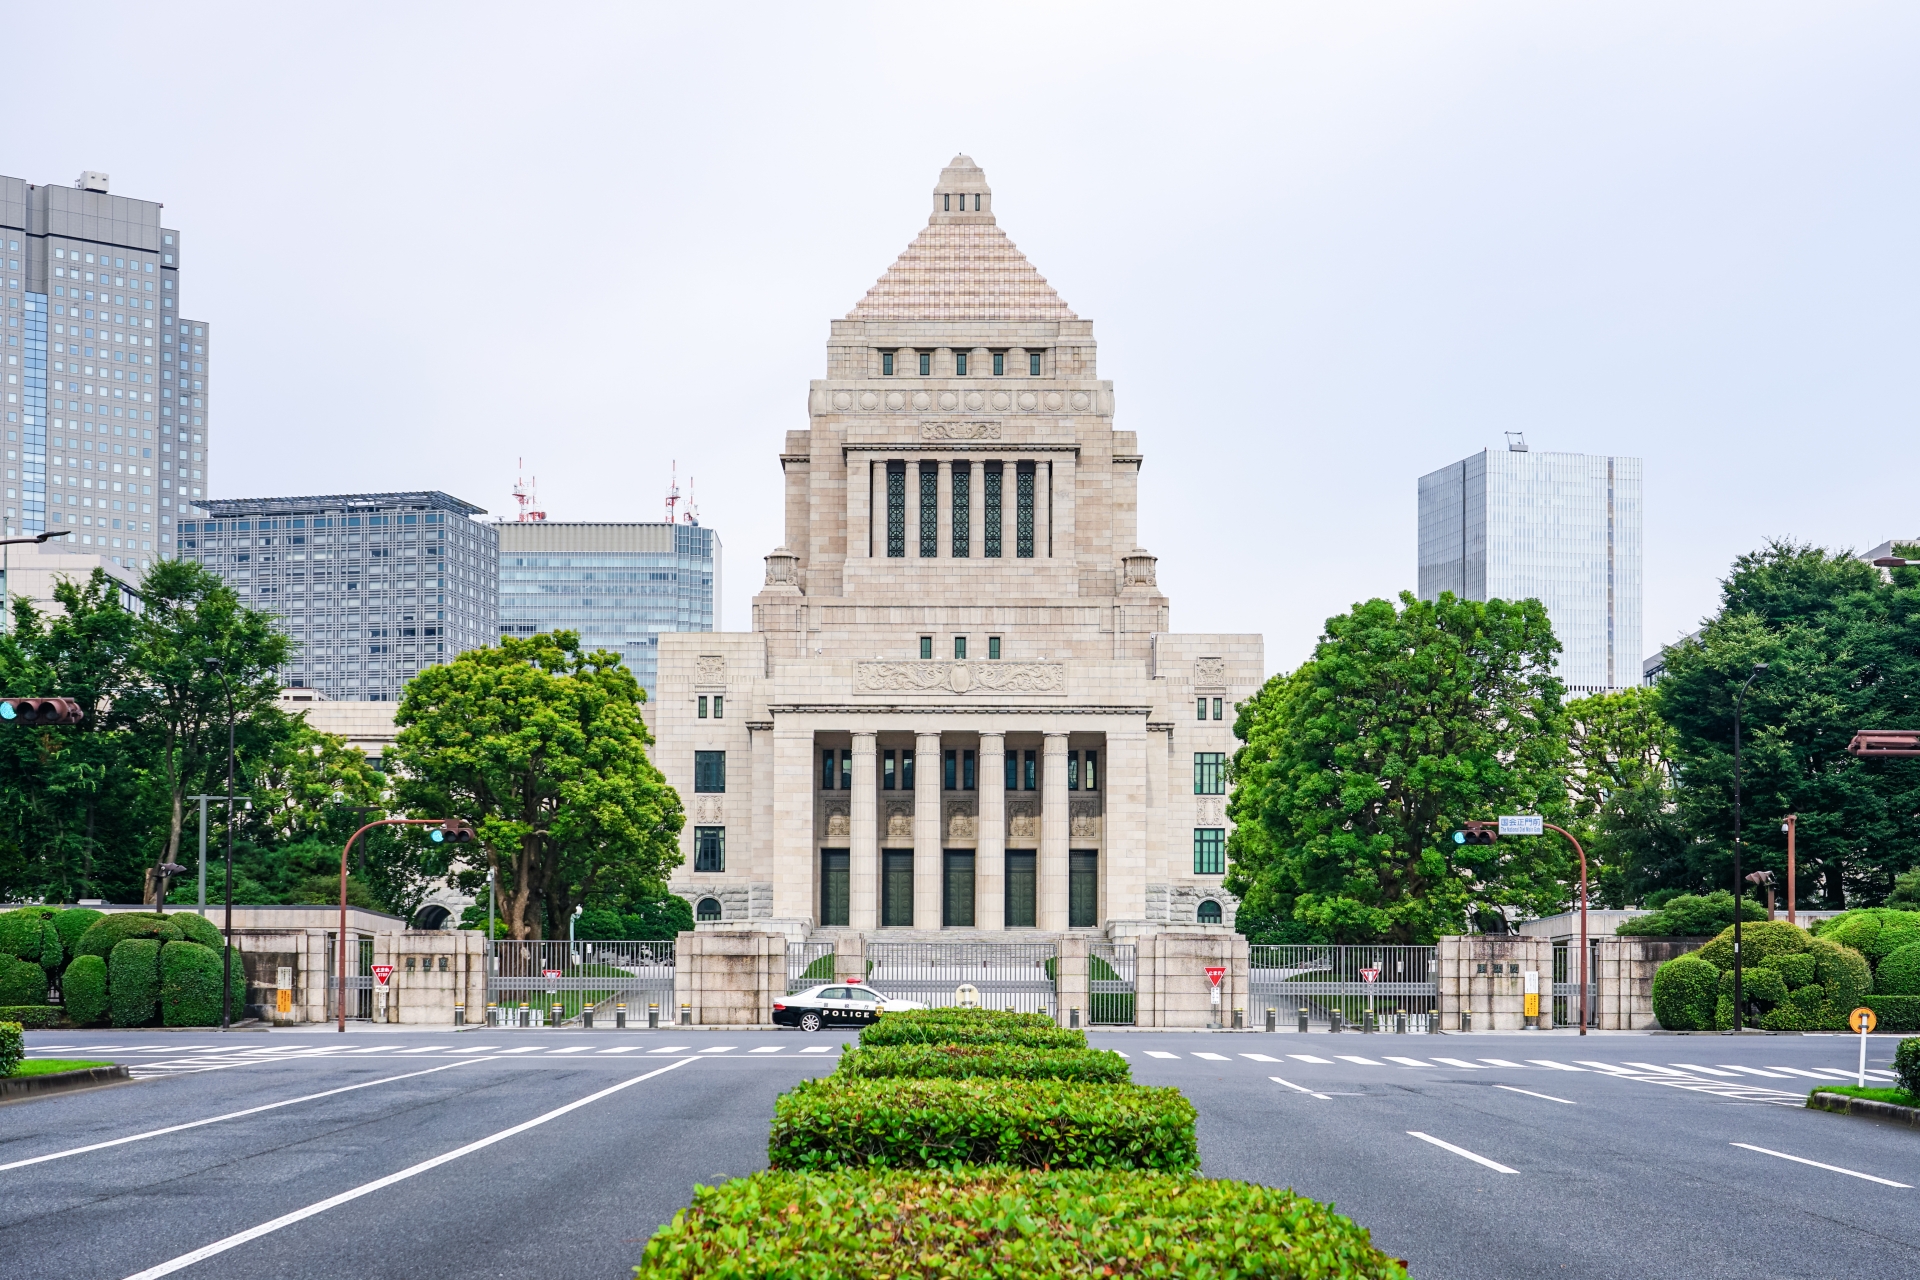 The Japanese National Parliament building shot right from the front